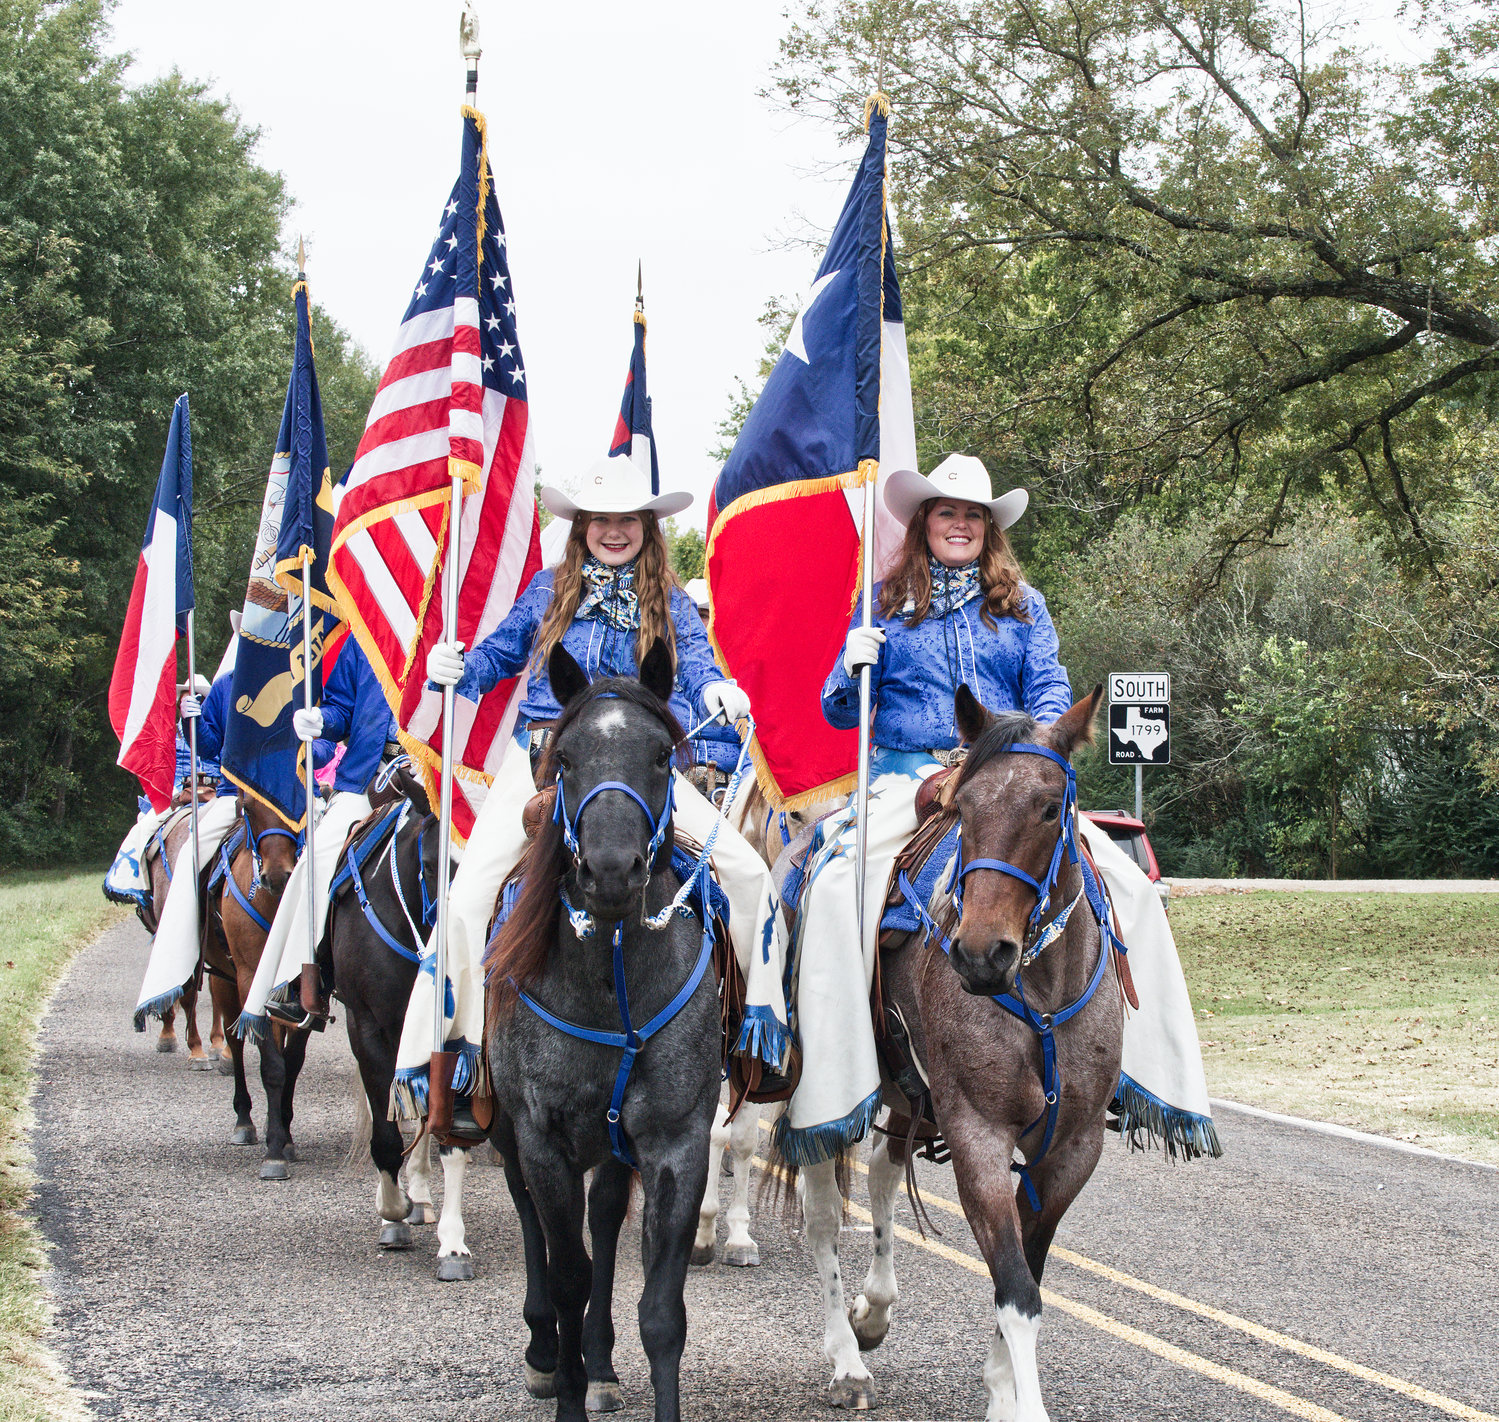 The Ghostriders riding club from Van takes part in the Saturday morning parade.